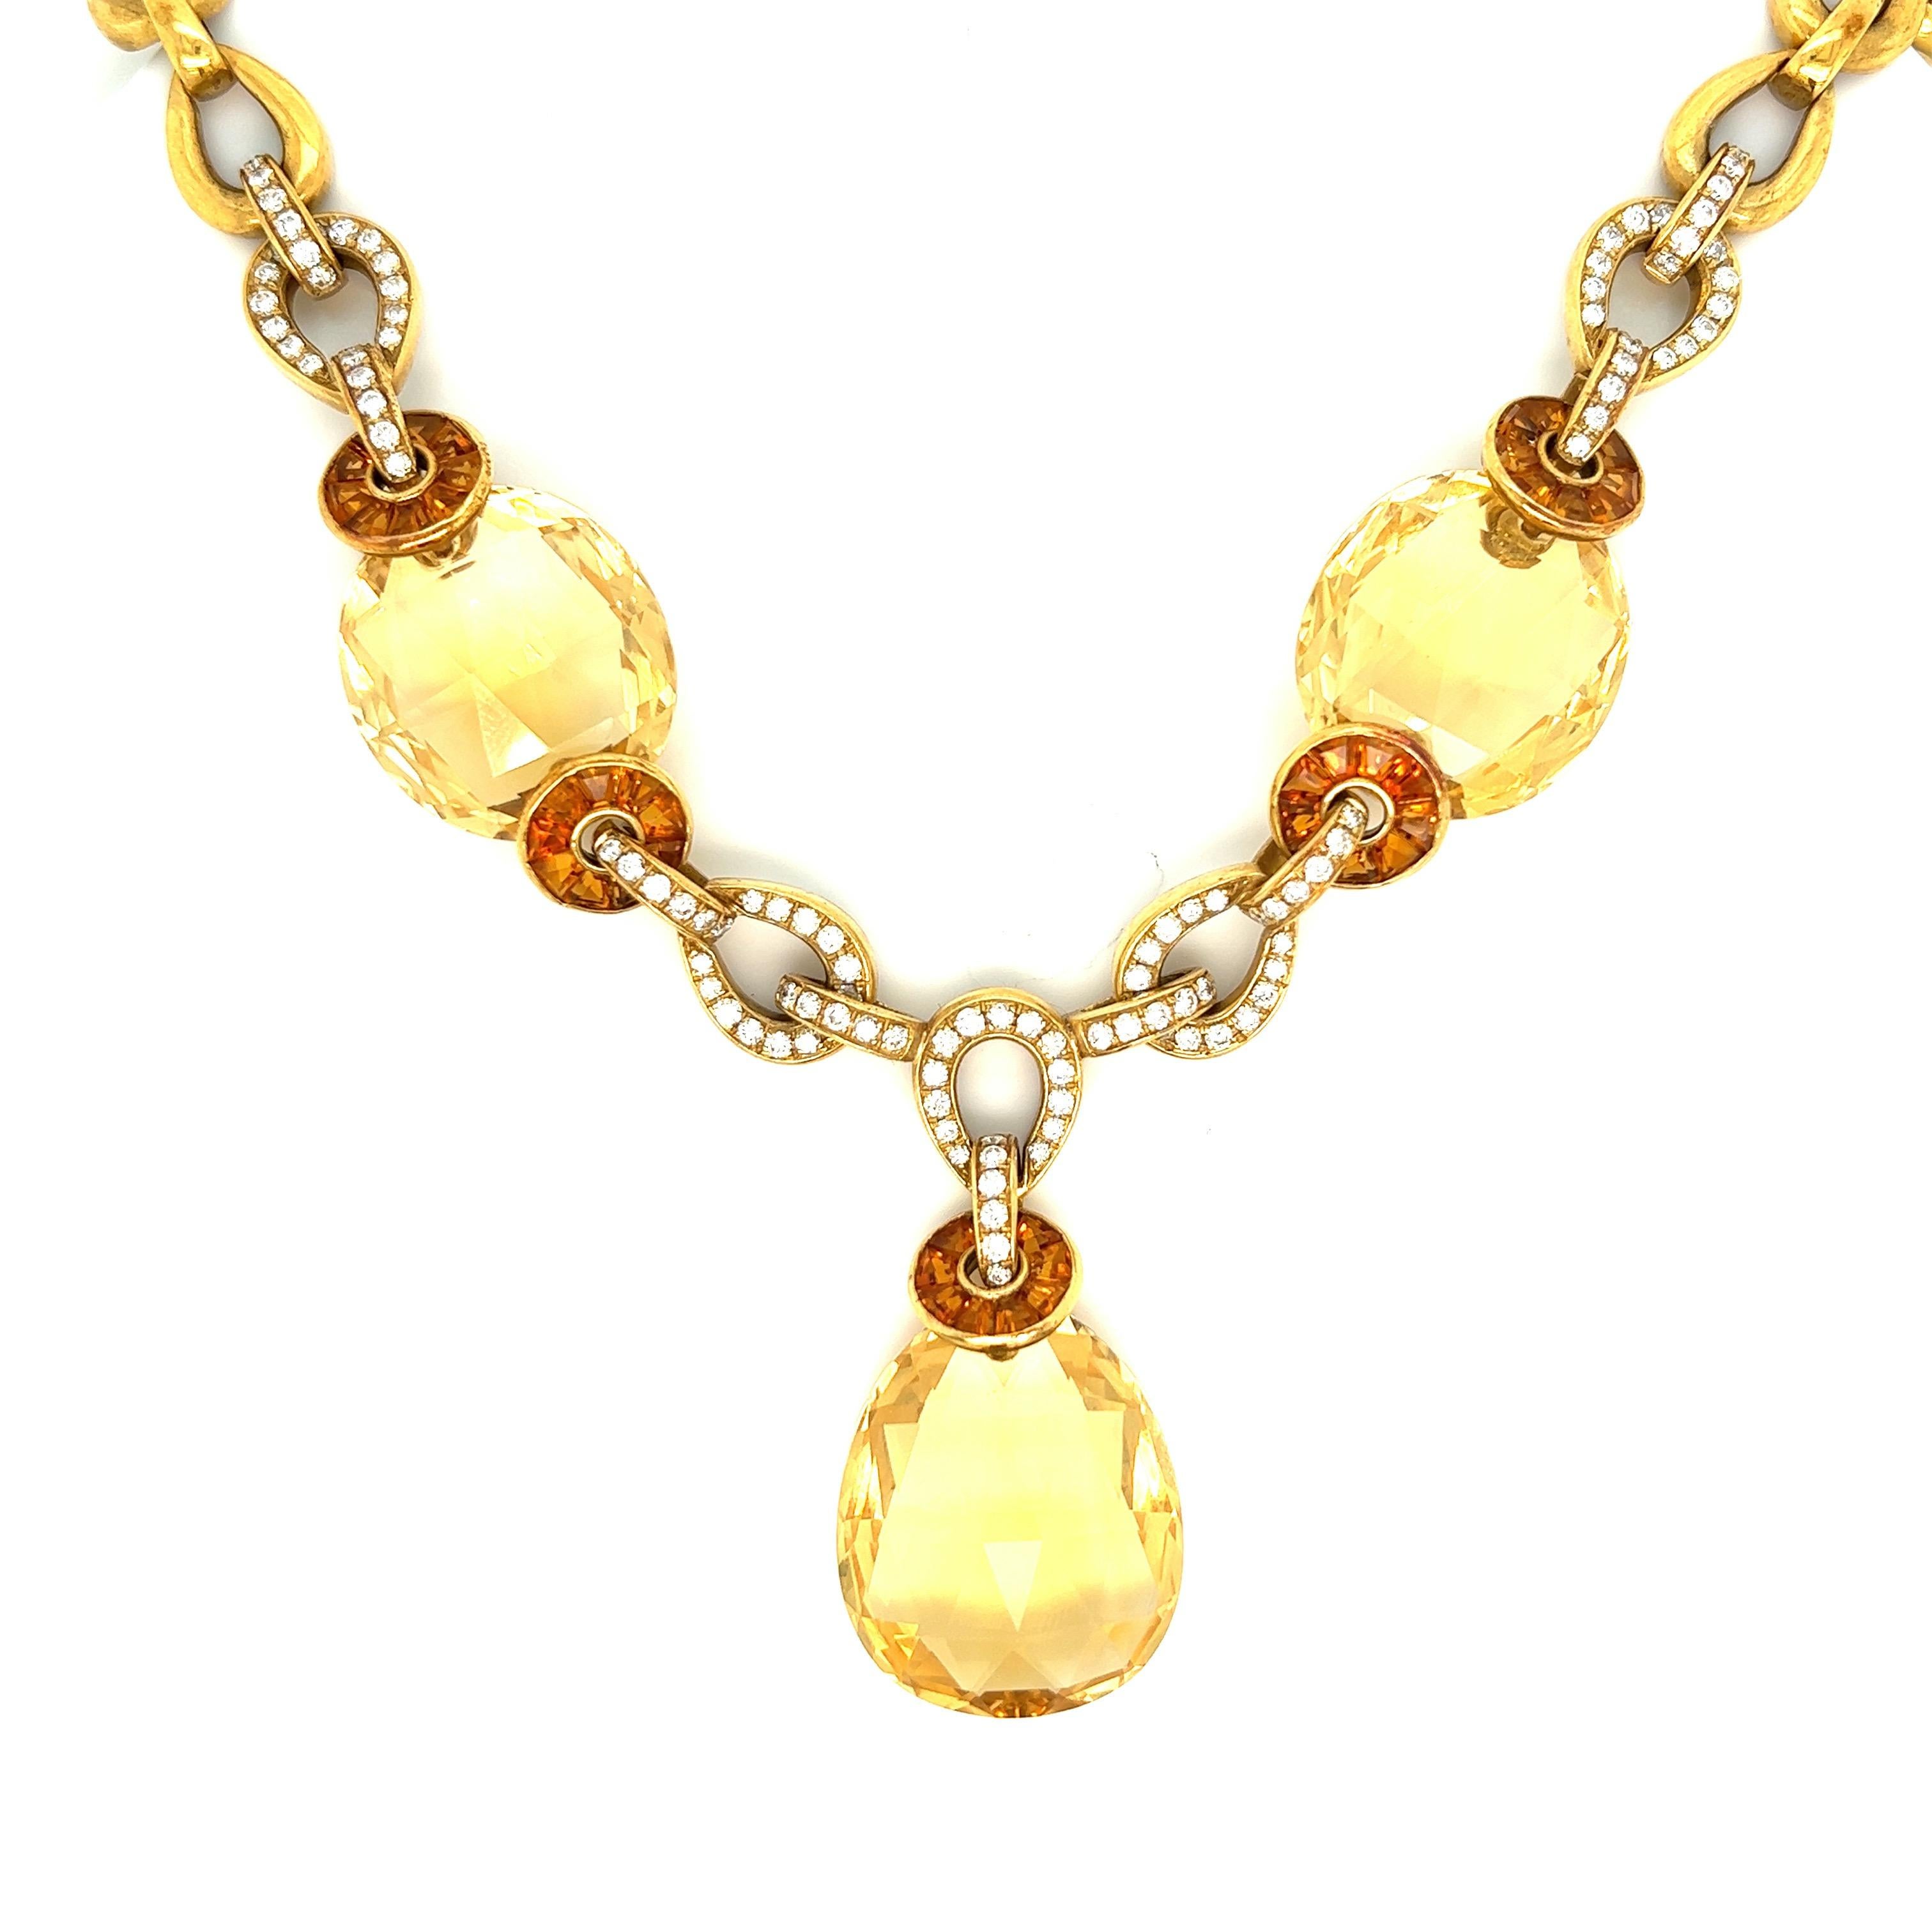 Citrine diamond pendant necklace 

Brilliant-cut diamonds of approximately 3 carats, 18 karat yellow gold; marked 750

Size: width 0.81 inch, length 16.25 inches
Total weight: 85.1 grams